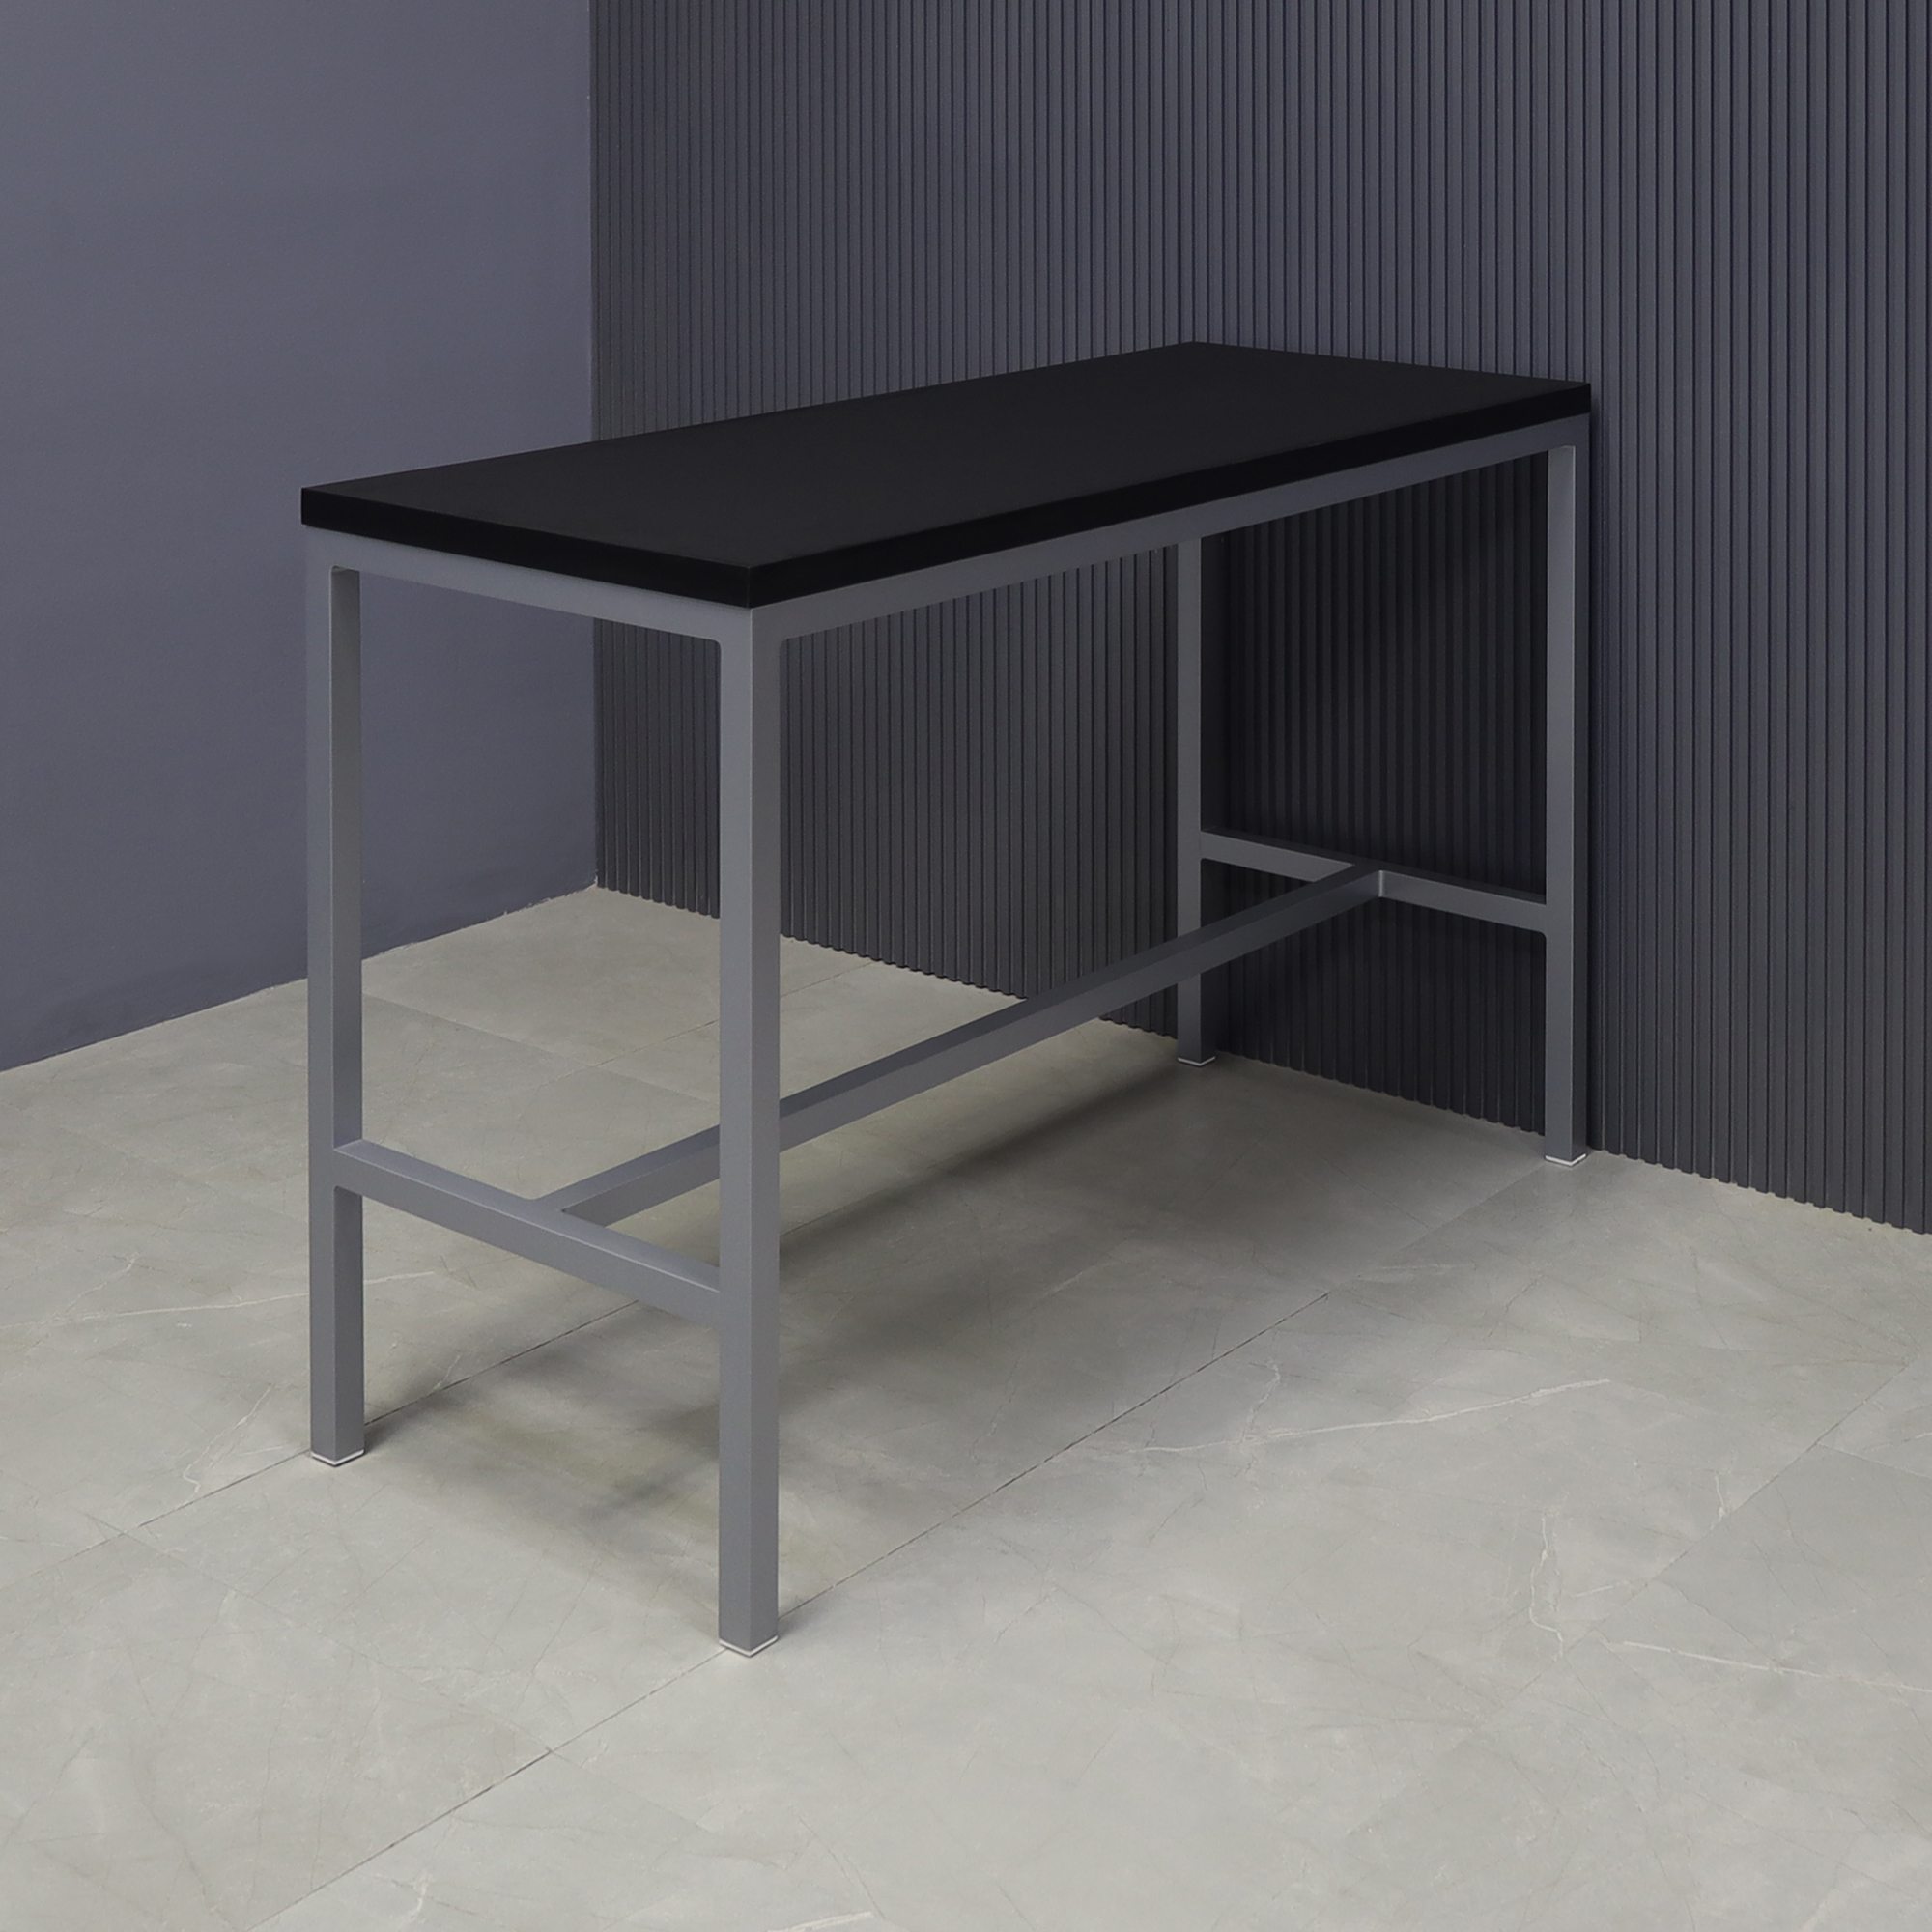 Aspen Bar Table in black traceless laminate top and gray aluminum framing shown here.